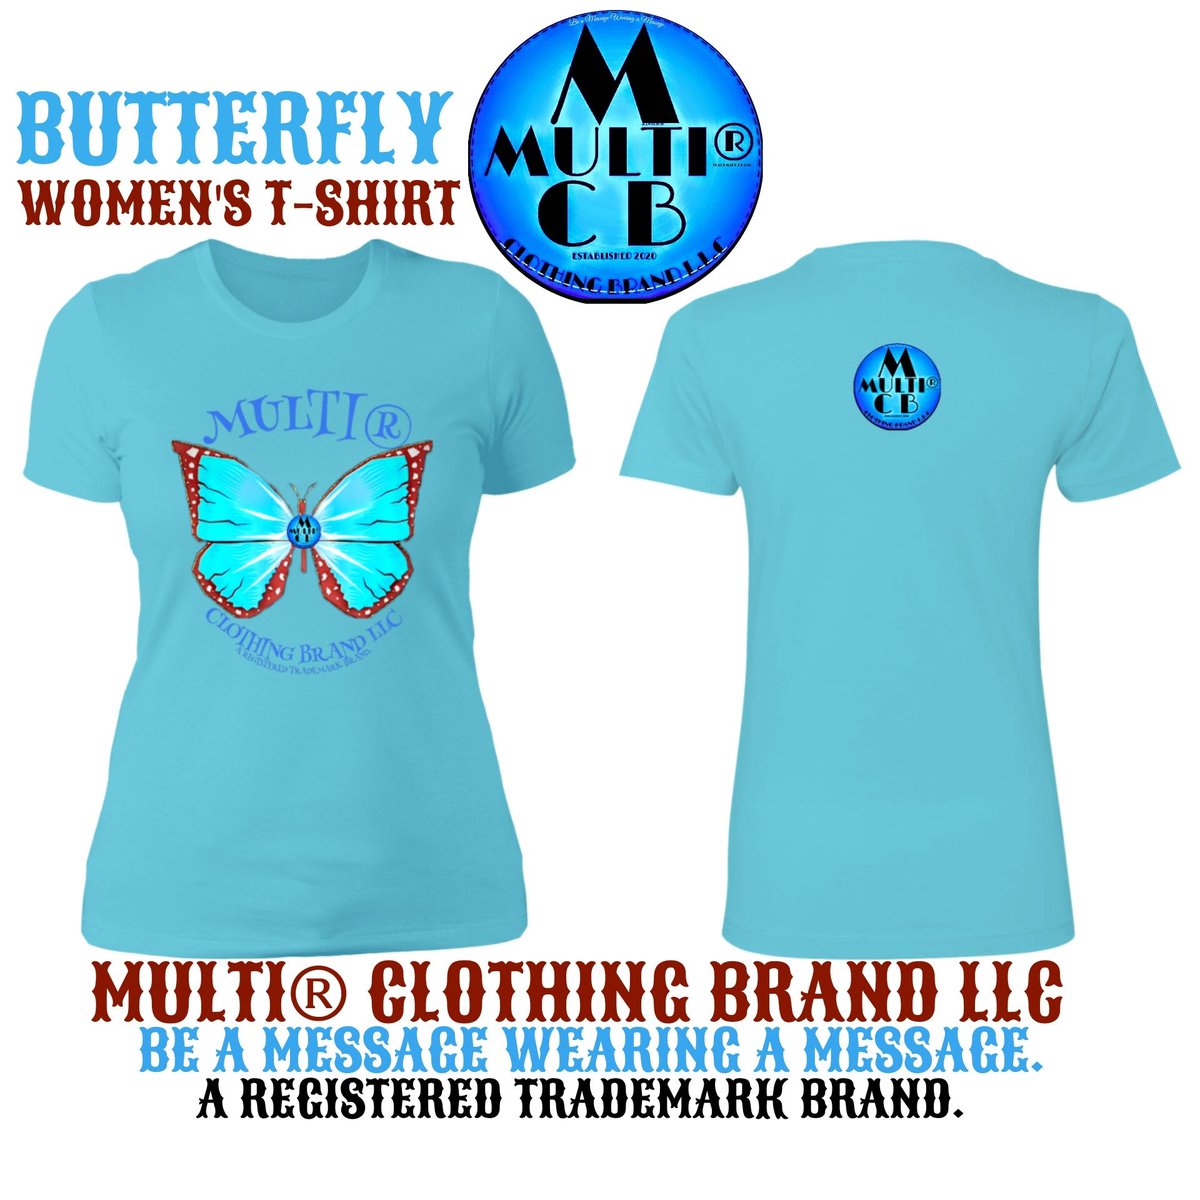 Multi - Butterfly - Ladies Vintage T-Shirt – Multi Clothing Brand L L C®
multiclothingbrand.com/products/multi…
#clothingbrand #clothingline #clothingstore #clothingcompany #sustainable #affordable #premium #clothings #ethical #streetclothing #streetwear #multi #clothing #brand #llc